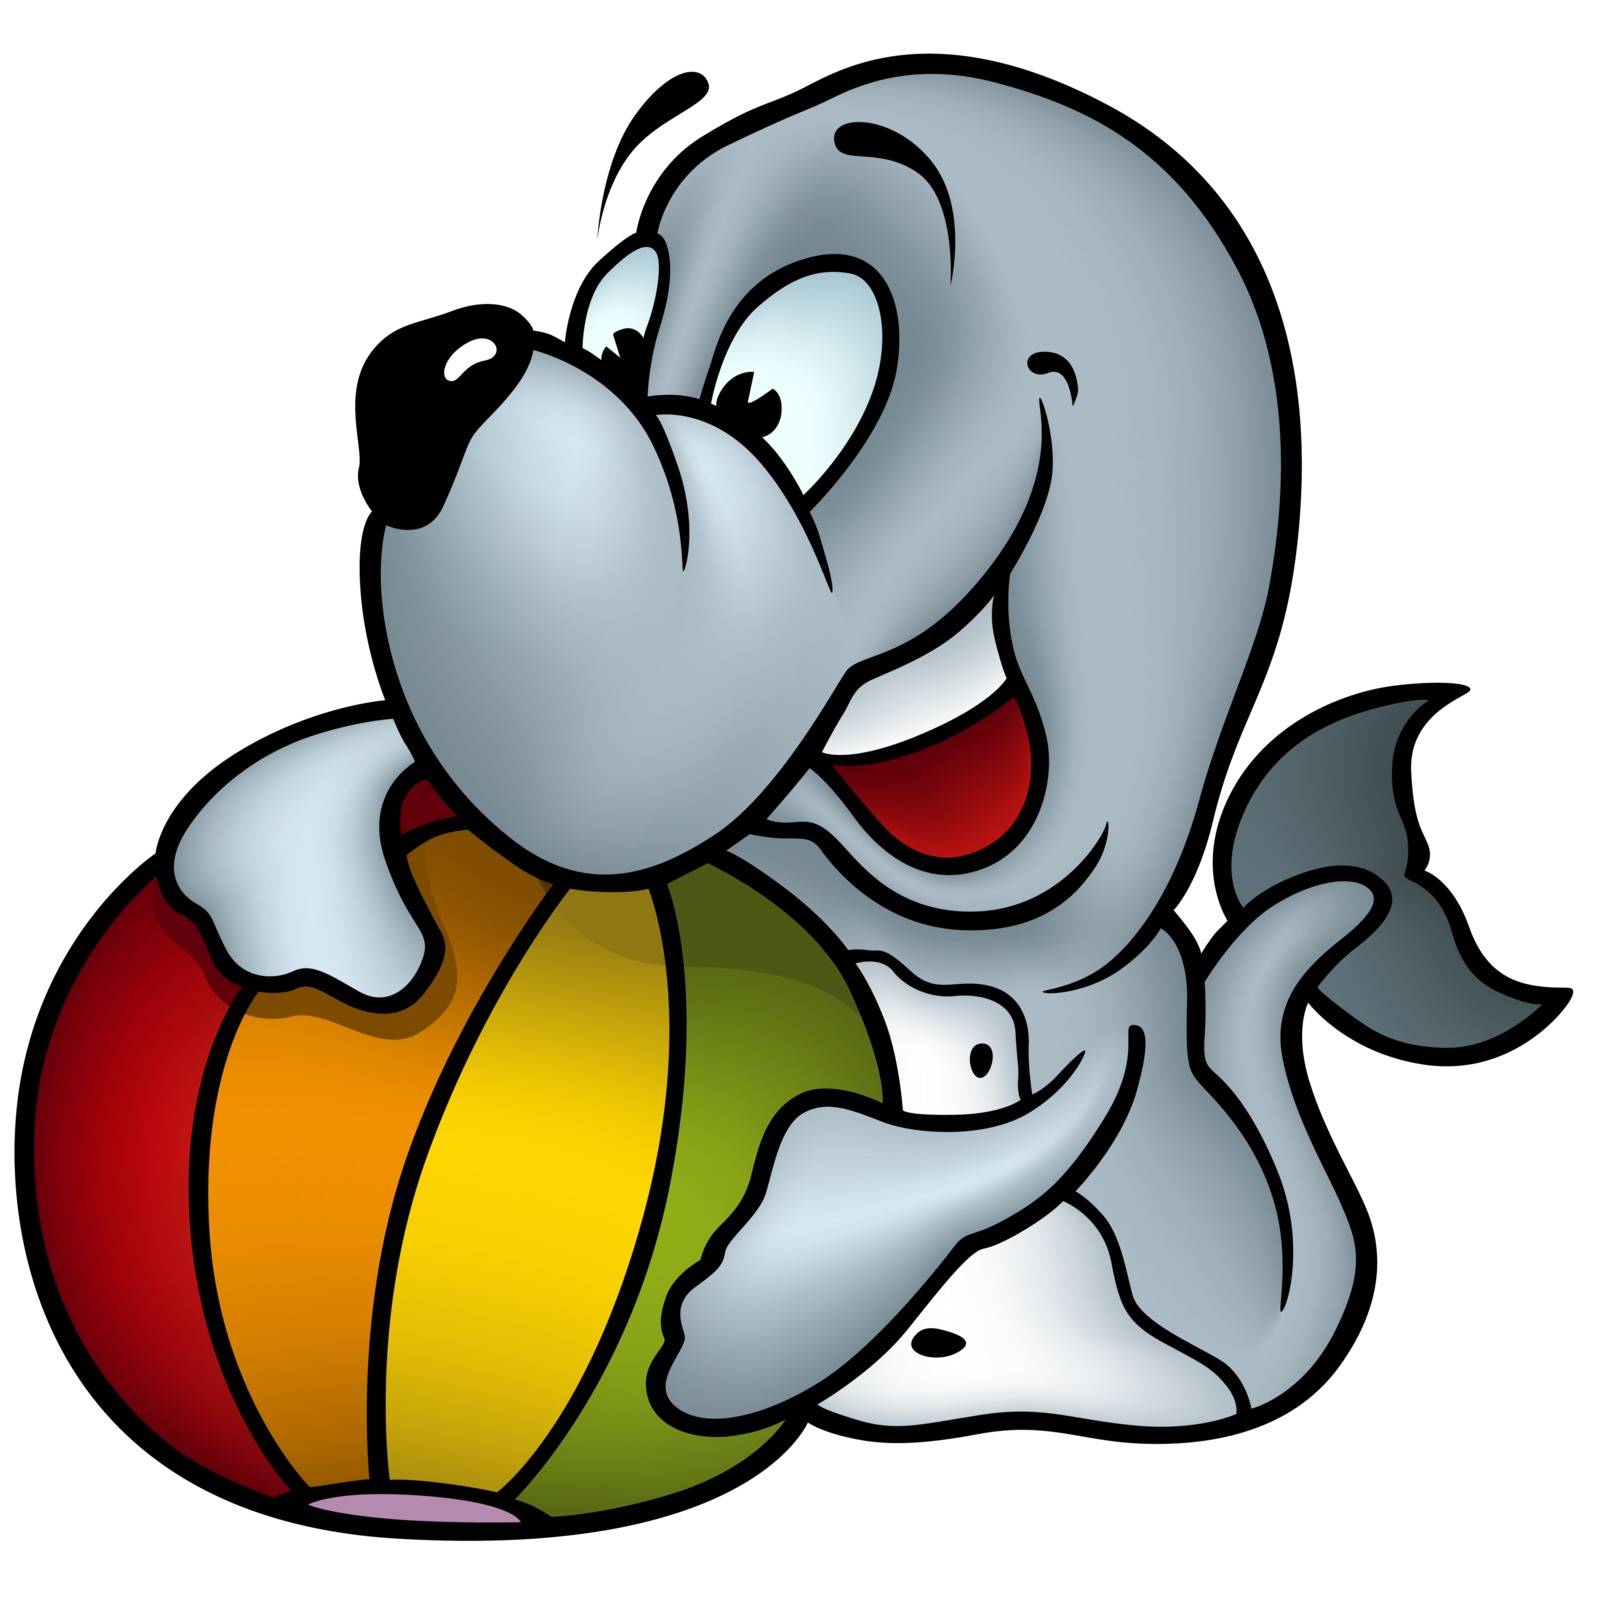 Seal And Beach Ball by illustratorCZ